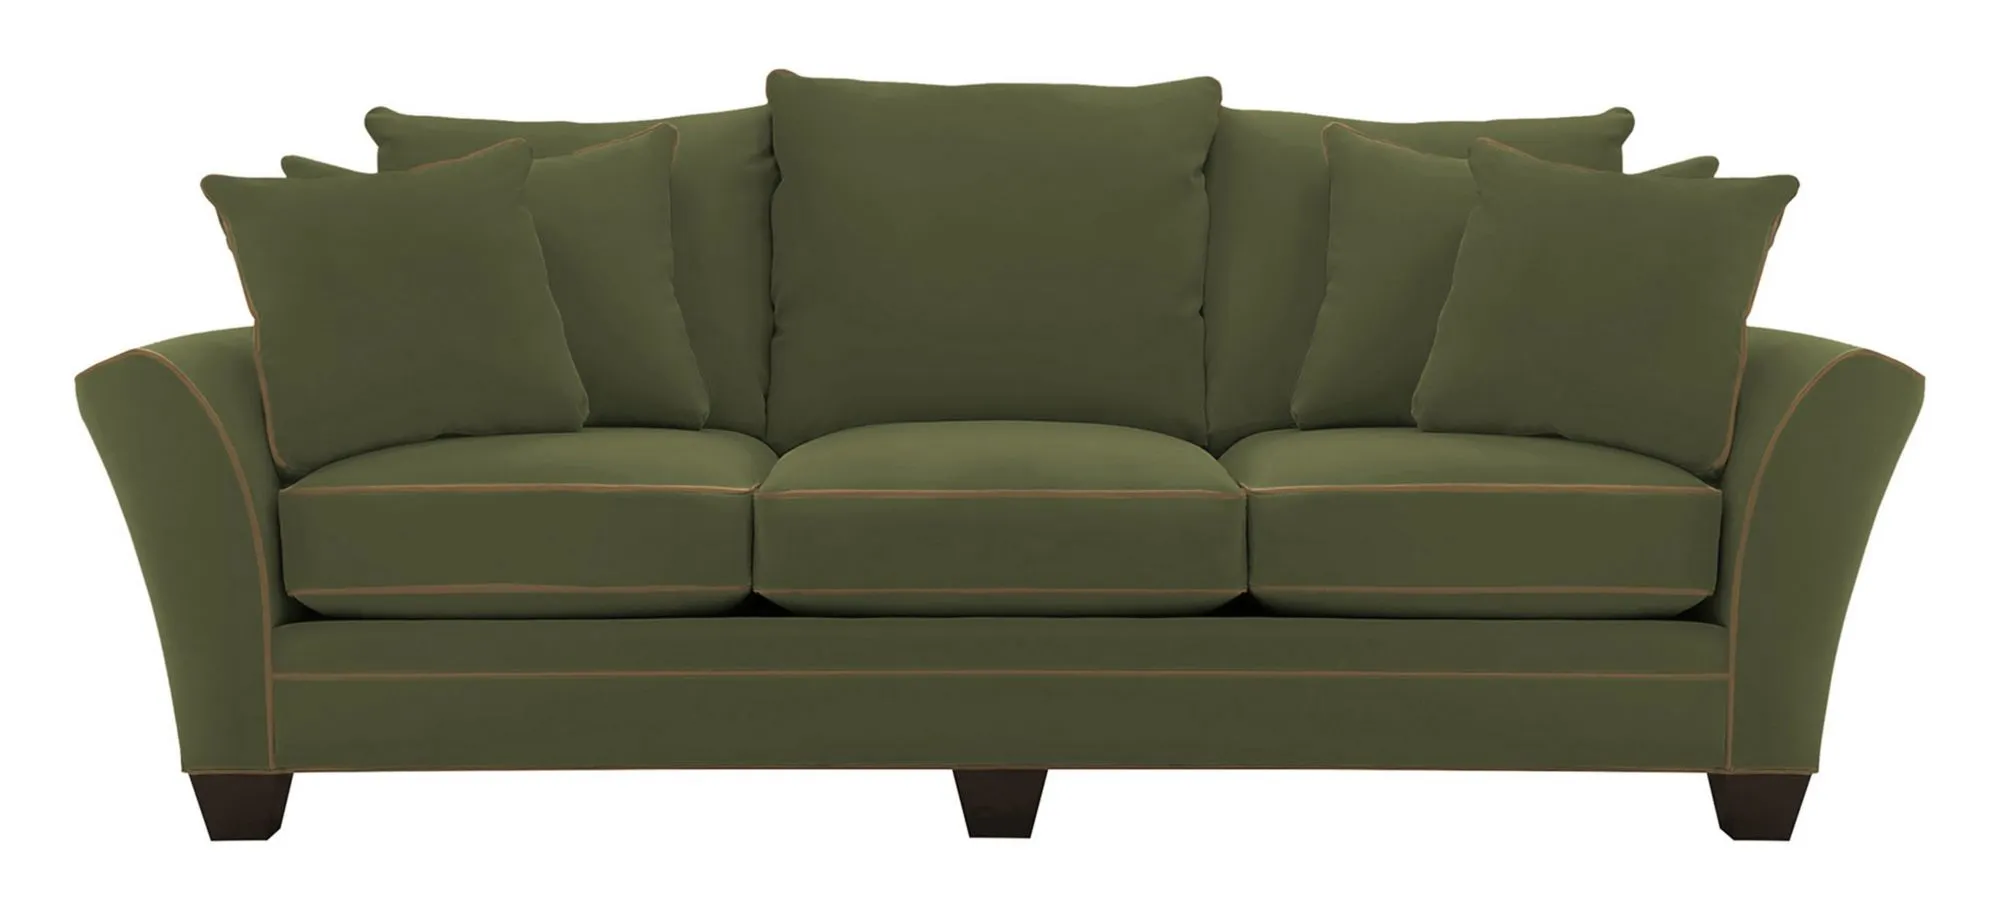 Briarwood Sofa in Suede So Soft Pine/Khaki by H.M. Richards